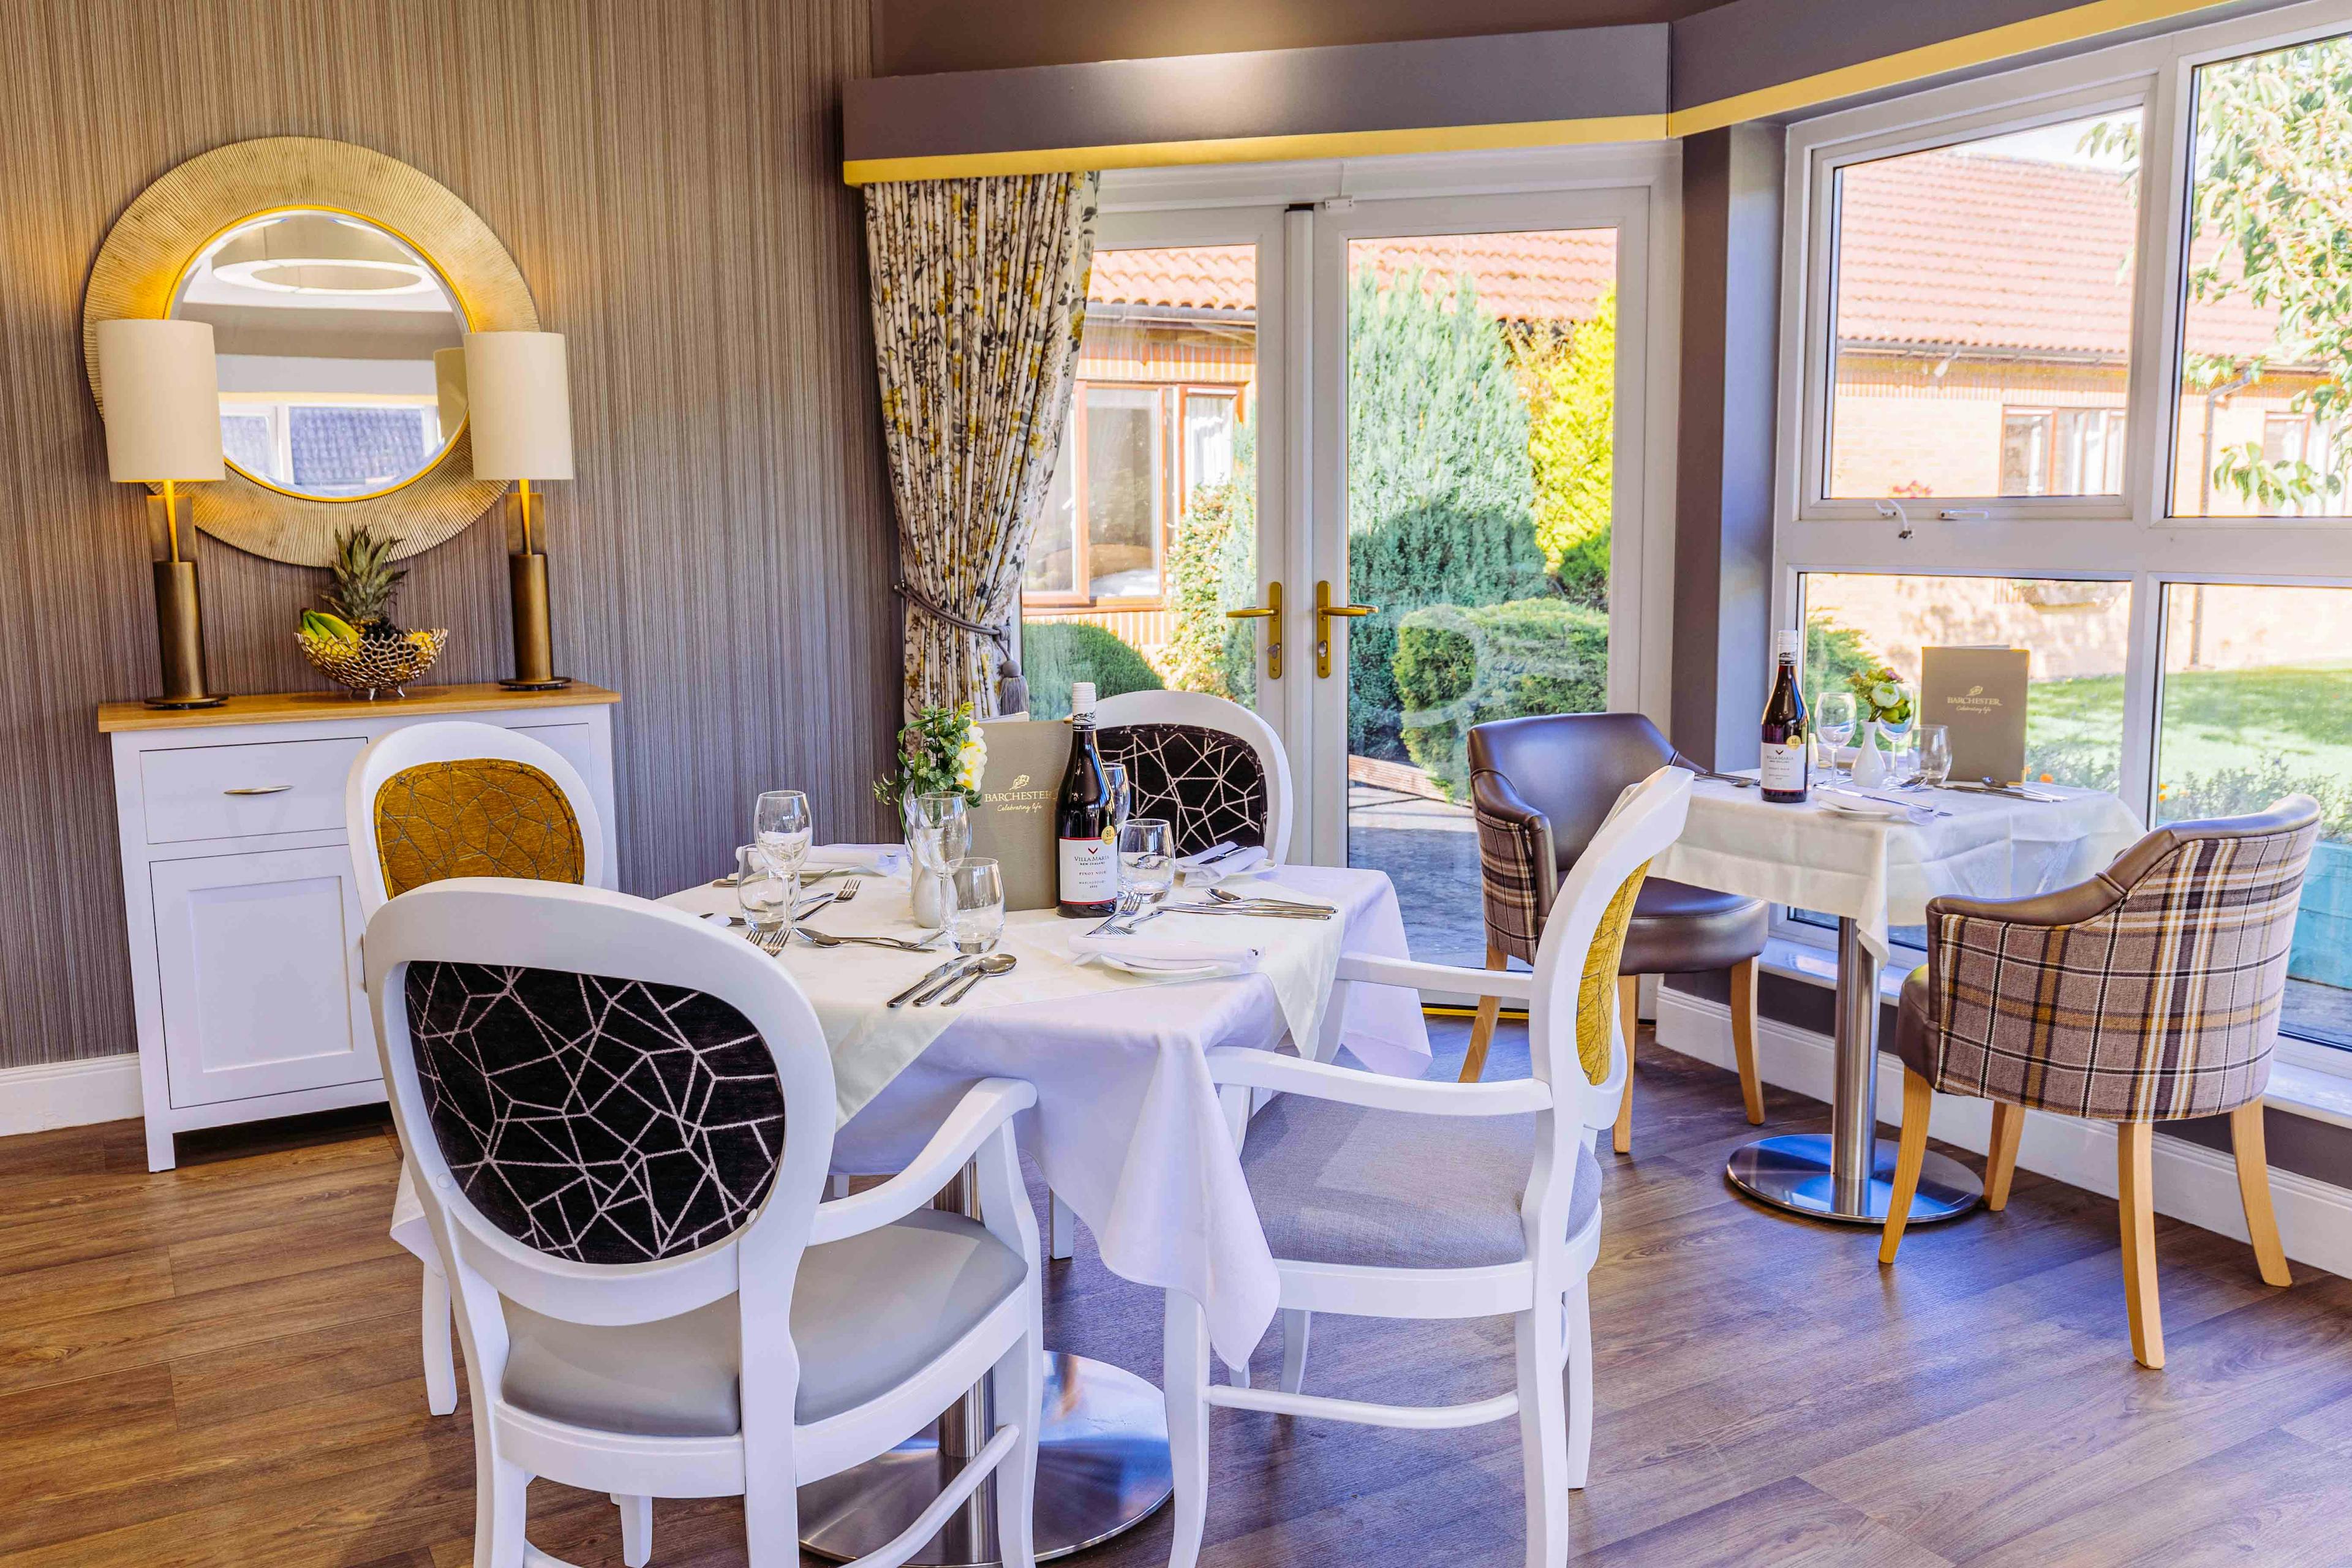 Dining Area at Lanercost House Care Home in Carlisle, Cumbria